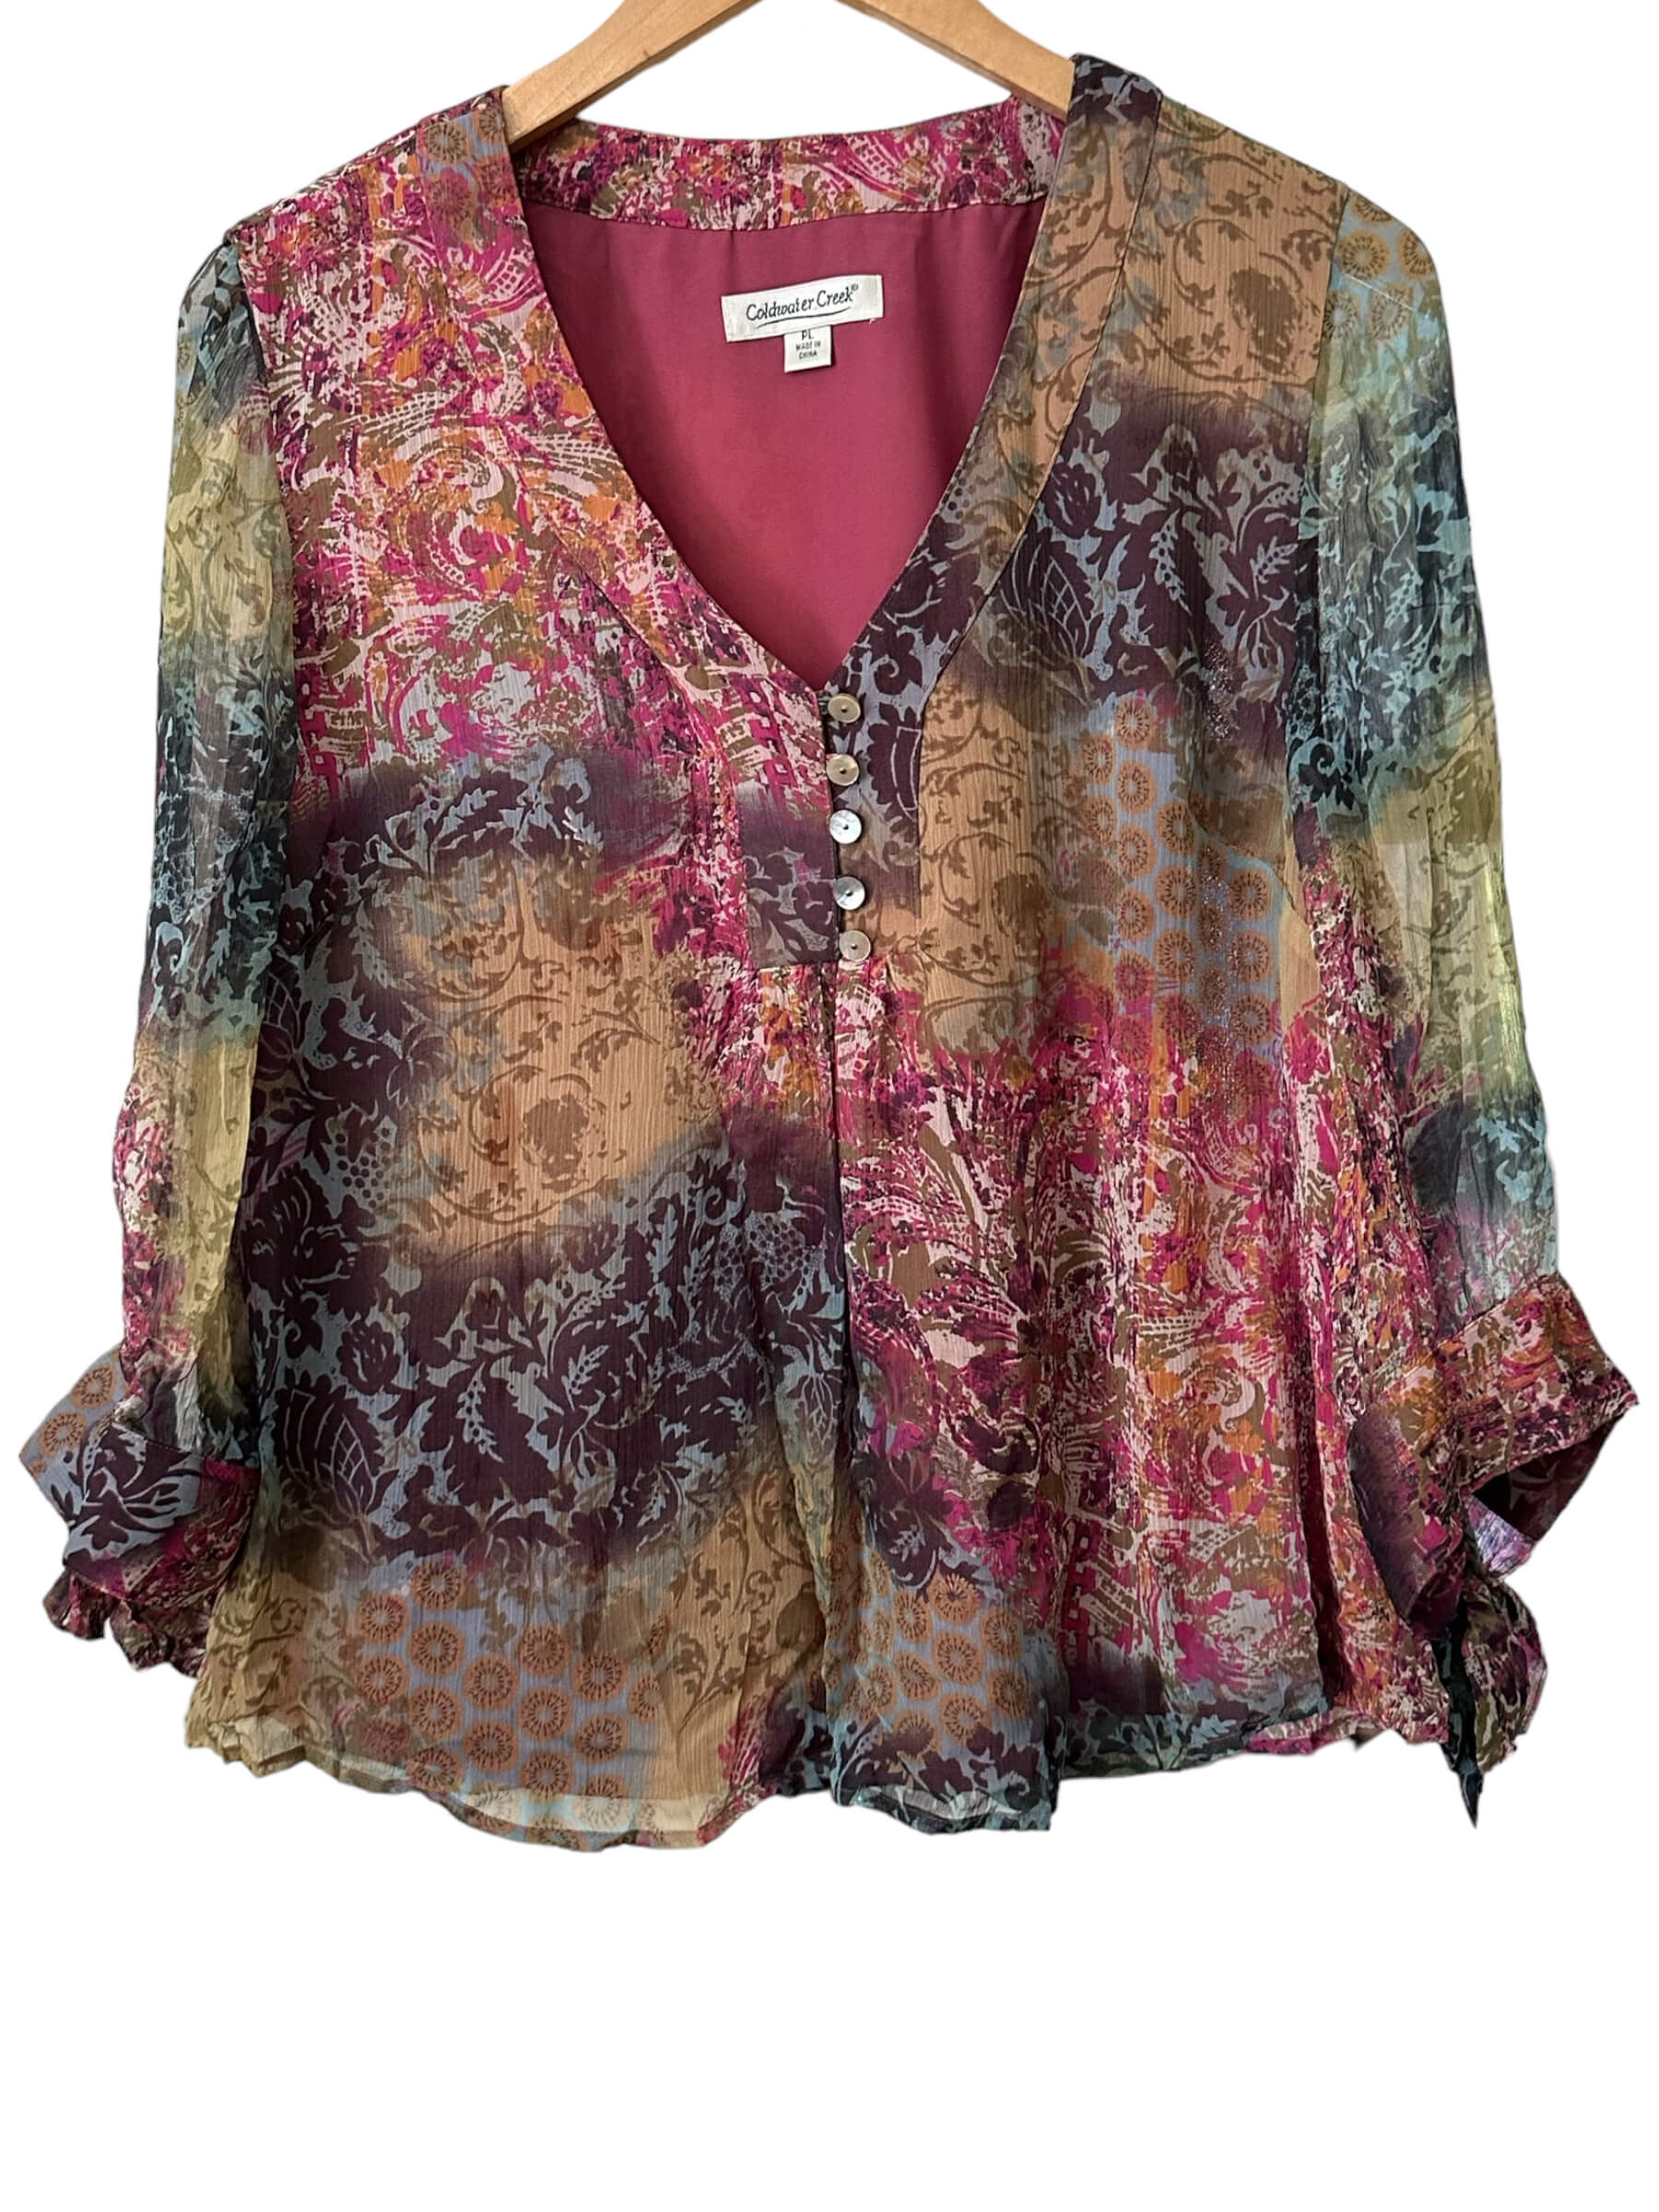 Coldwater Creek Fall Leaves Button Up V Neck Top